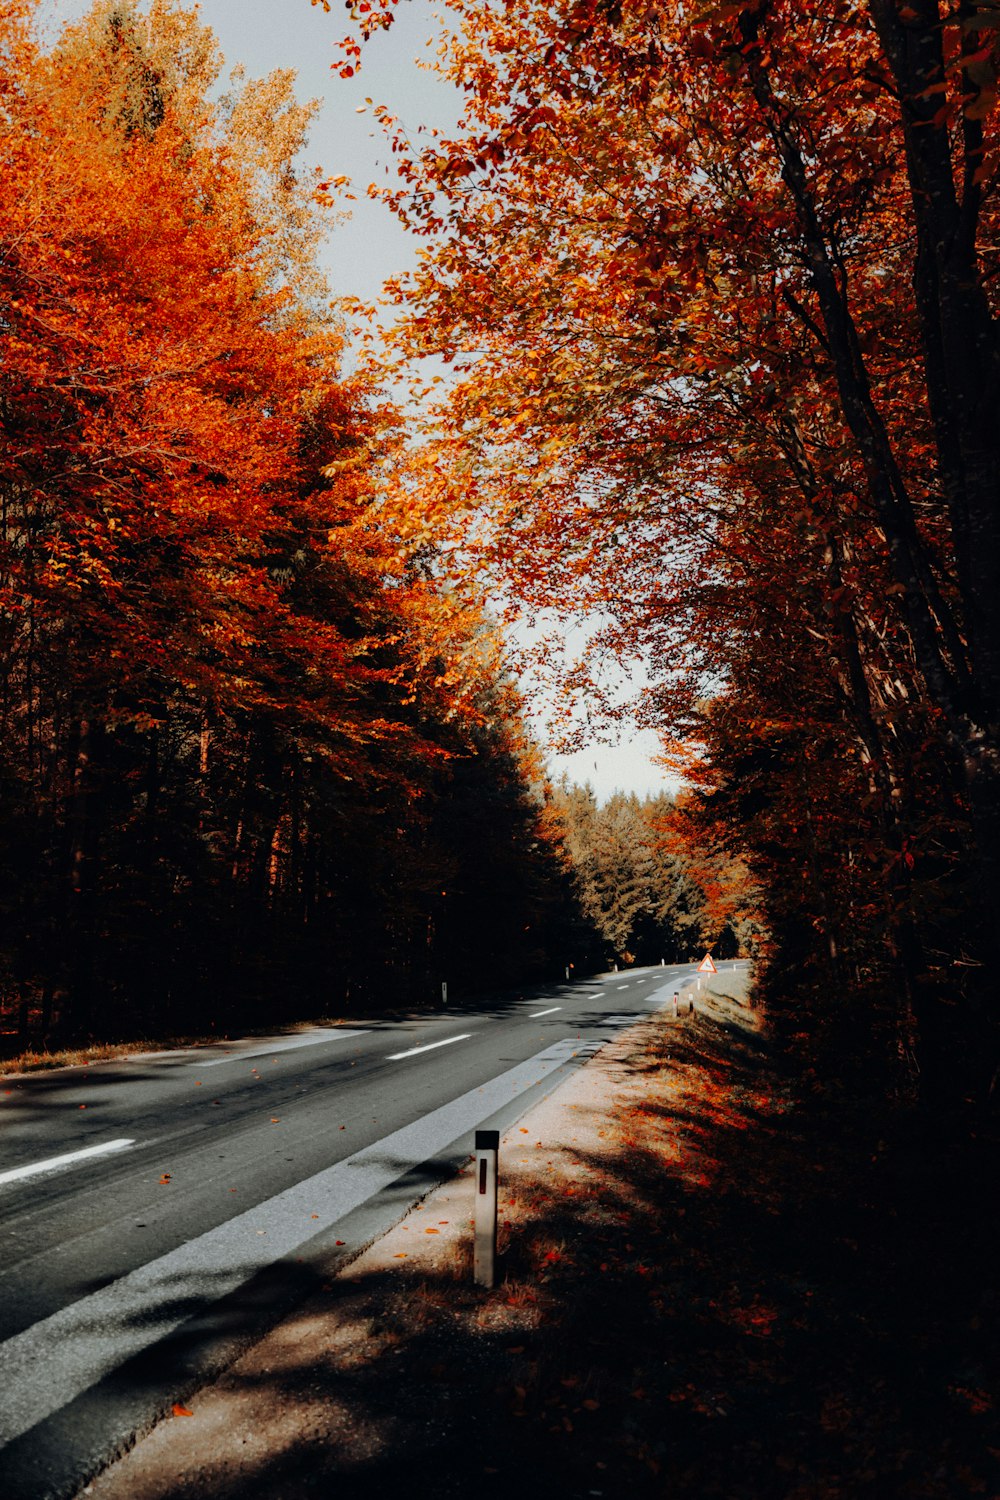 a road surrounded by trees with orange leaves